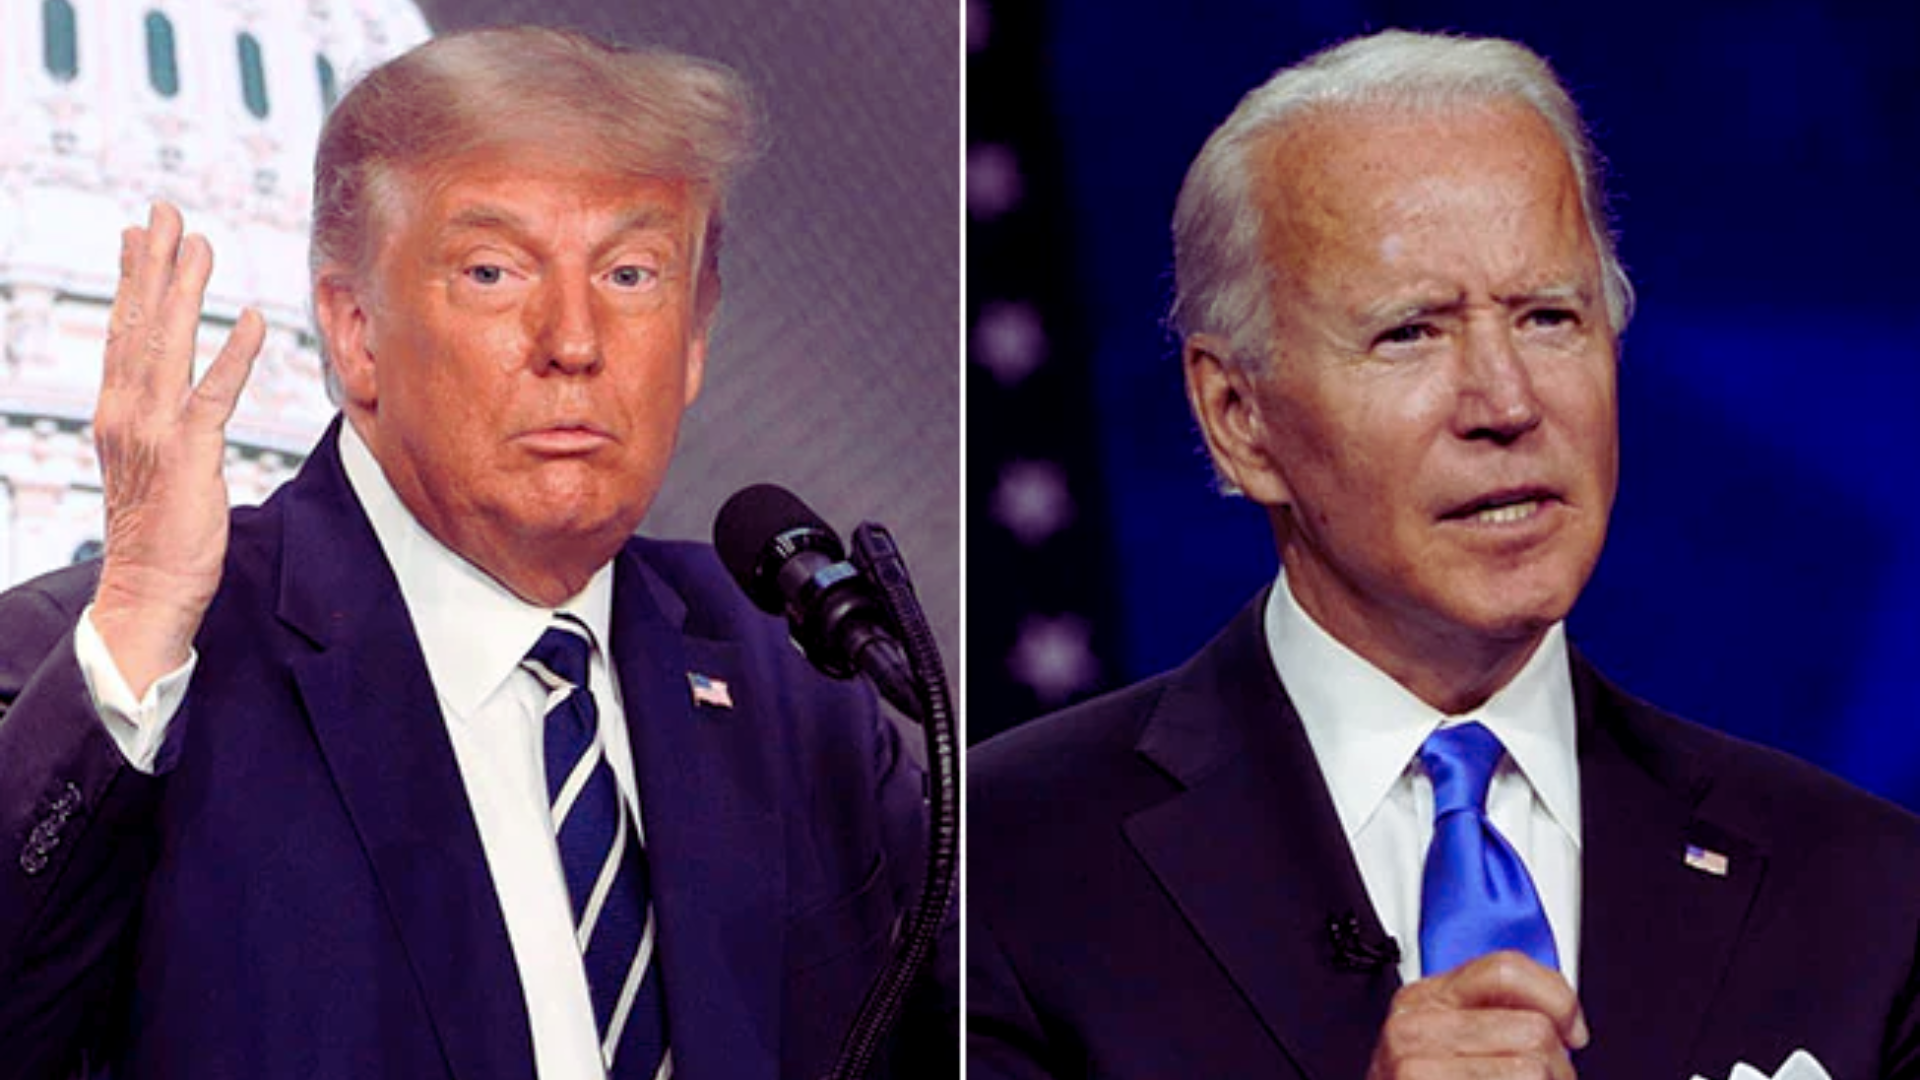 Super Tuesday Solidifies Trump and Biden as Front-Runners for November Election